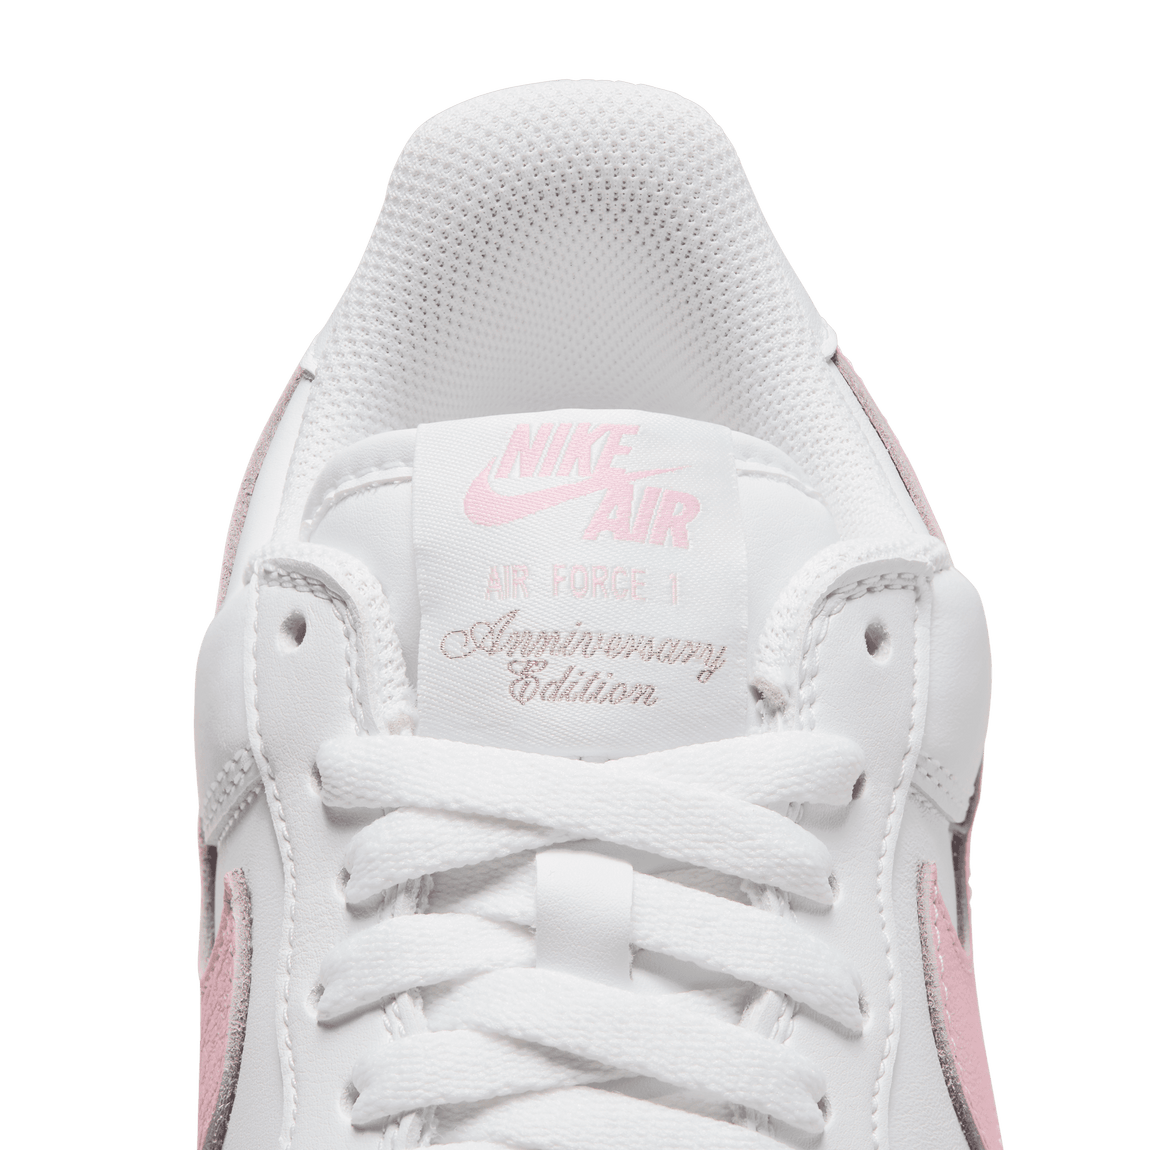 Nike Air Force 1 Low Retro (White/Pink/Gum Yellow-Metallic Gold) - Nike Air Force 1 Low Retro (White/Pink/Gum Yellow-Metallic Gold) - 